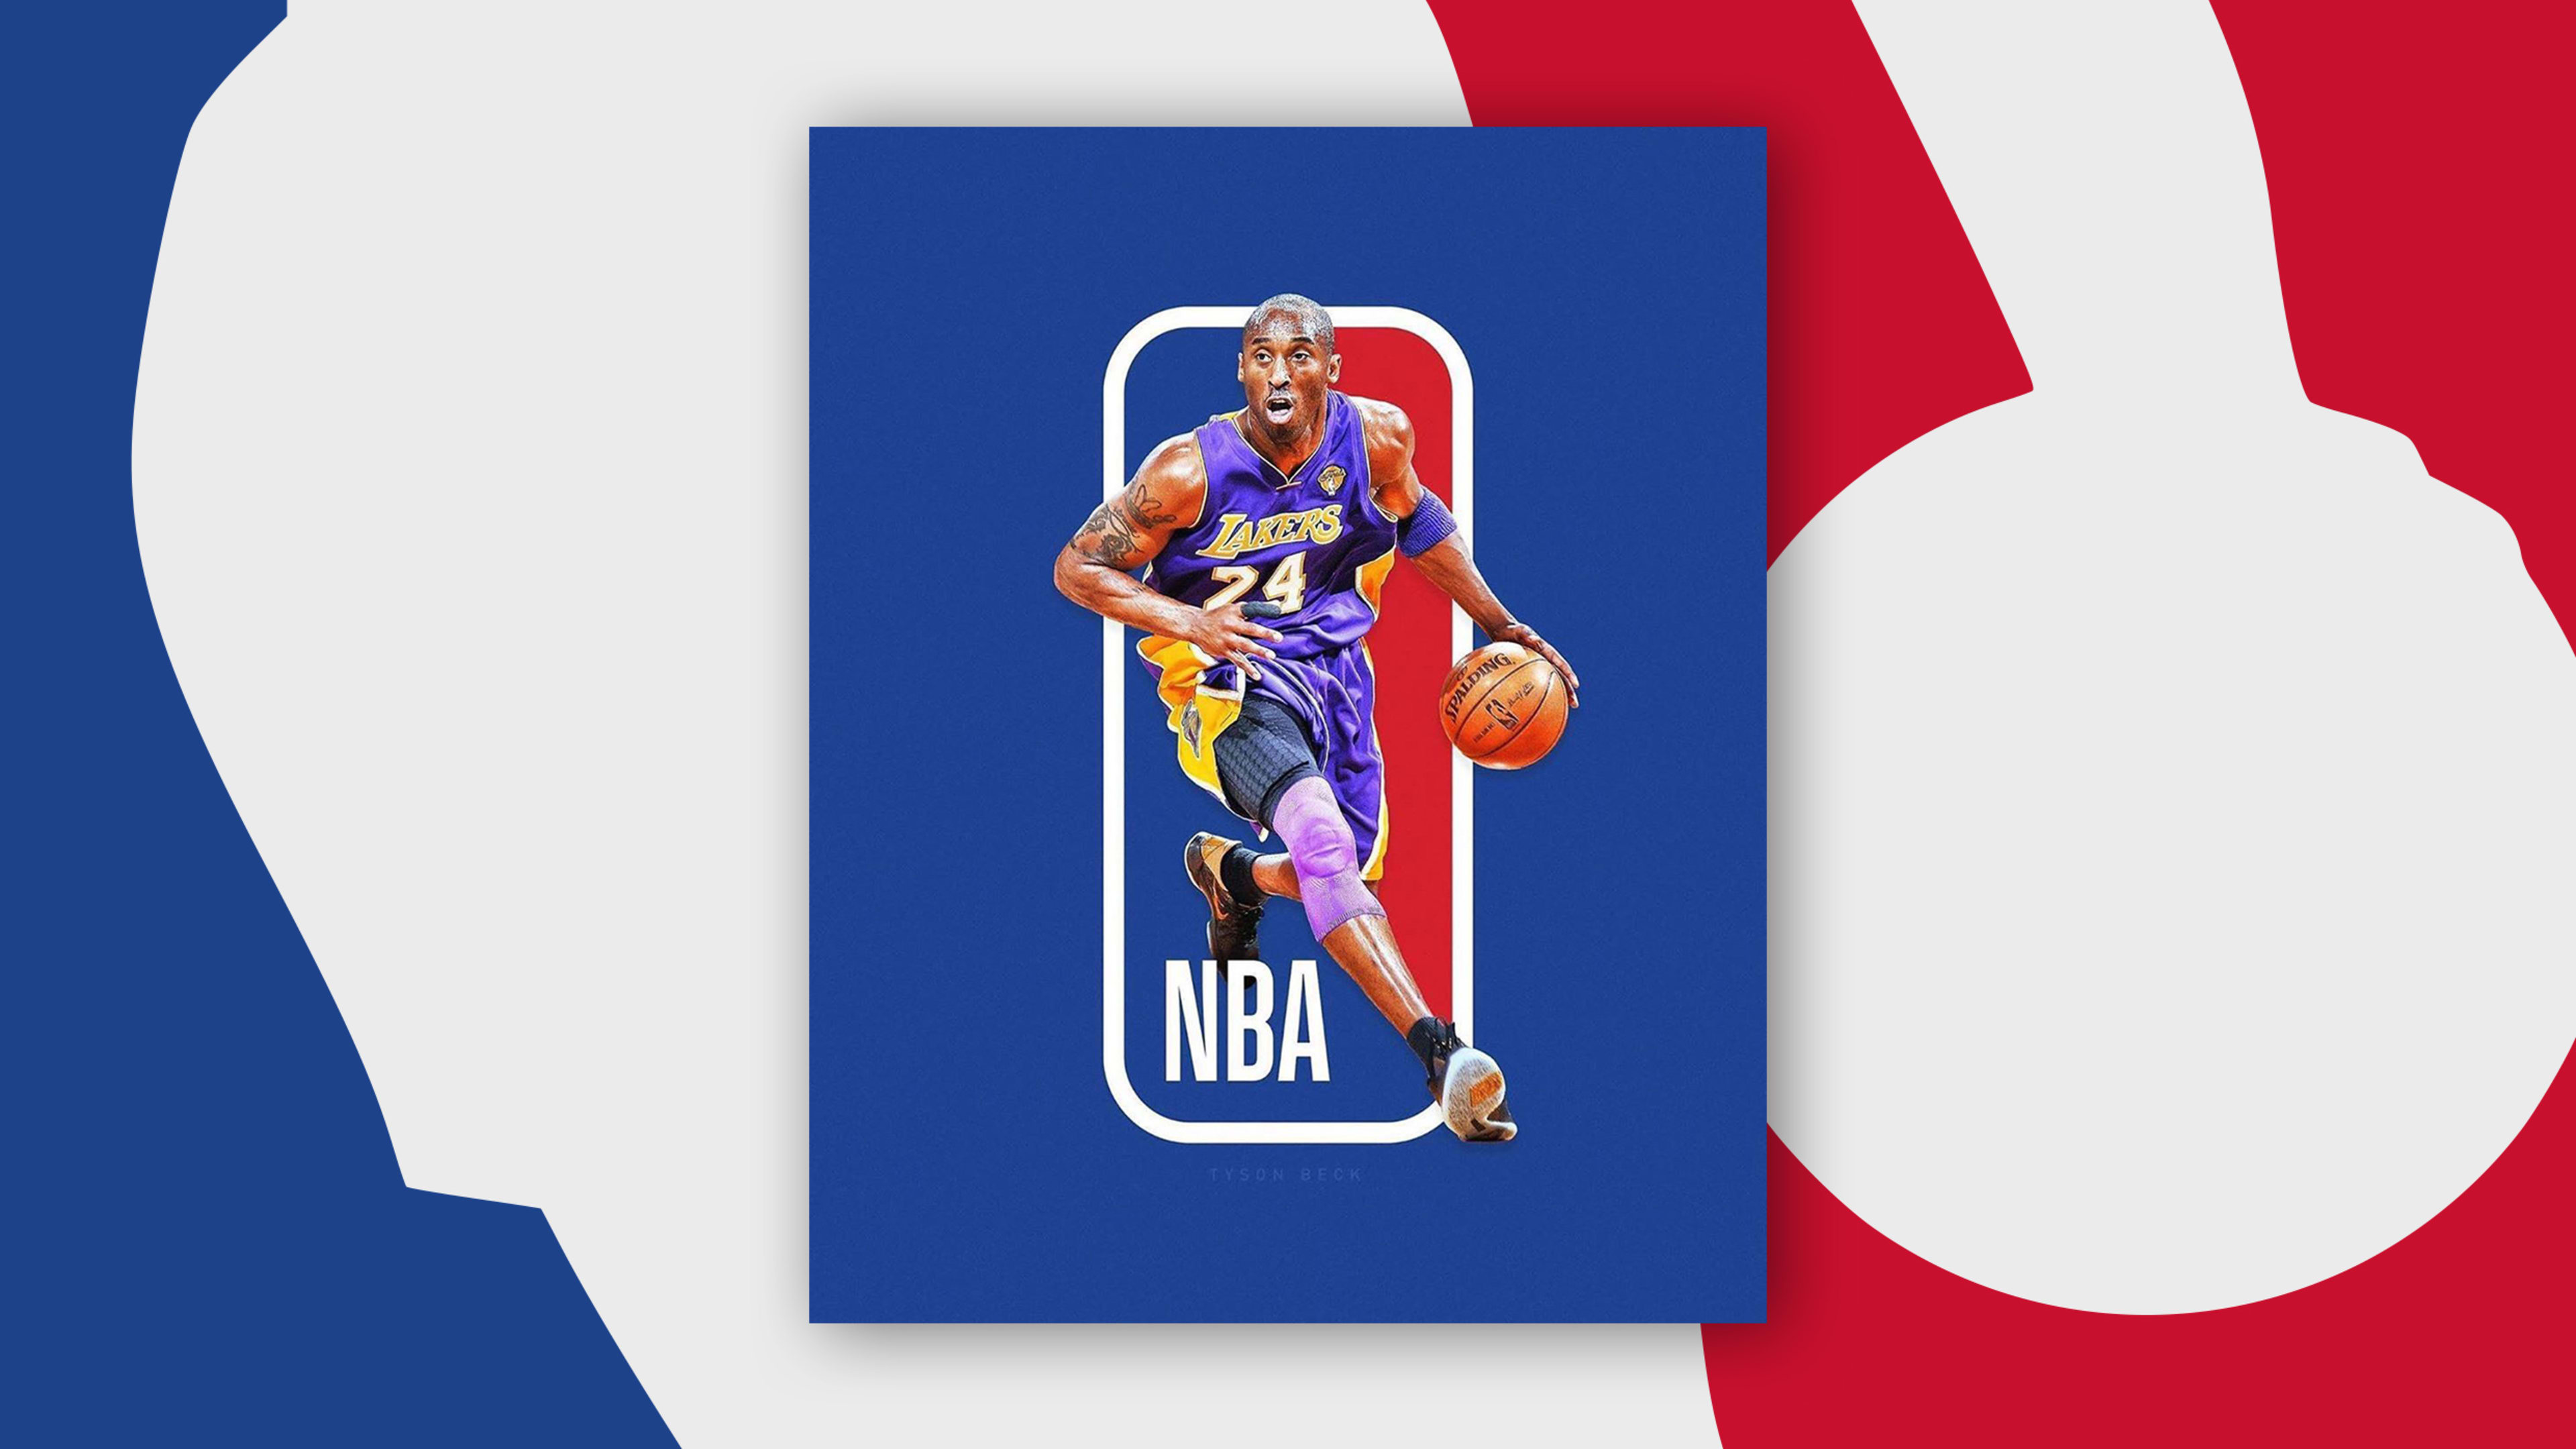 A petition to add Kobe Bryant to the NBA’s logo has 2 million signatures